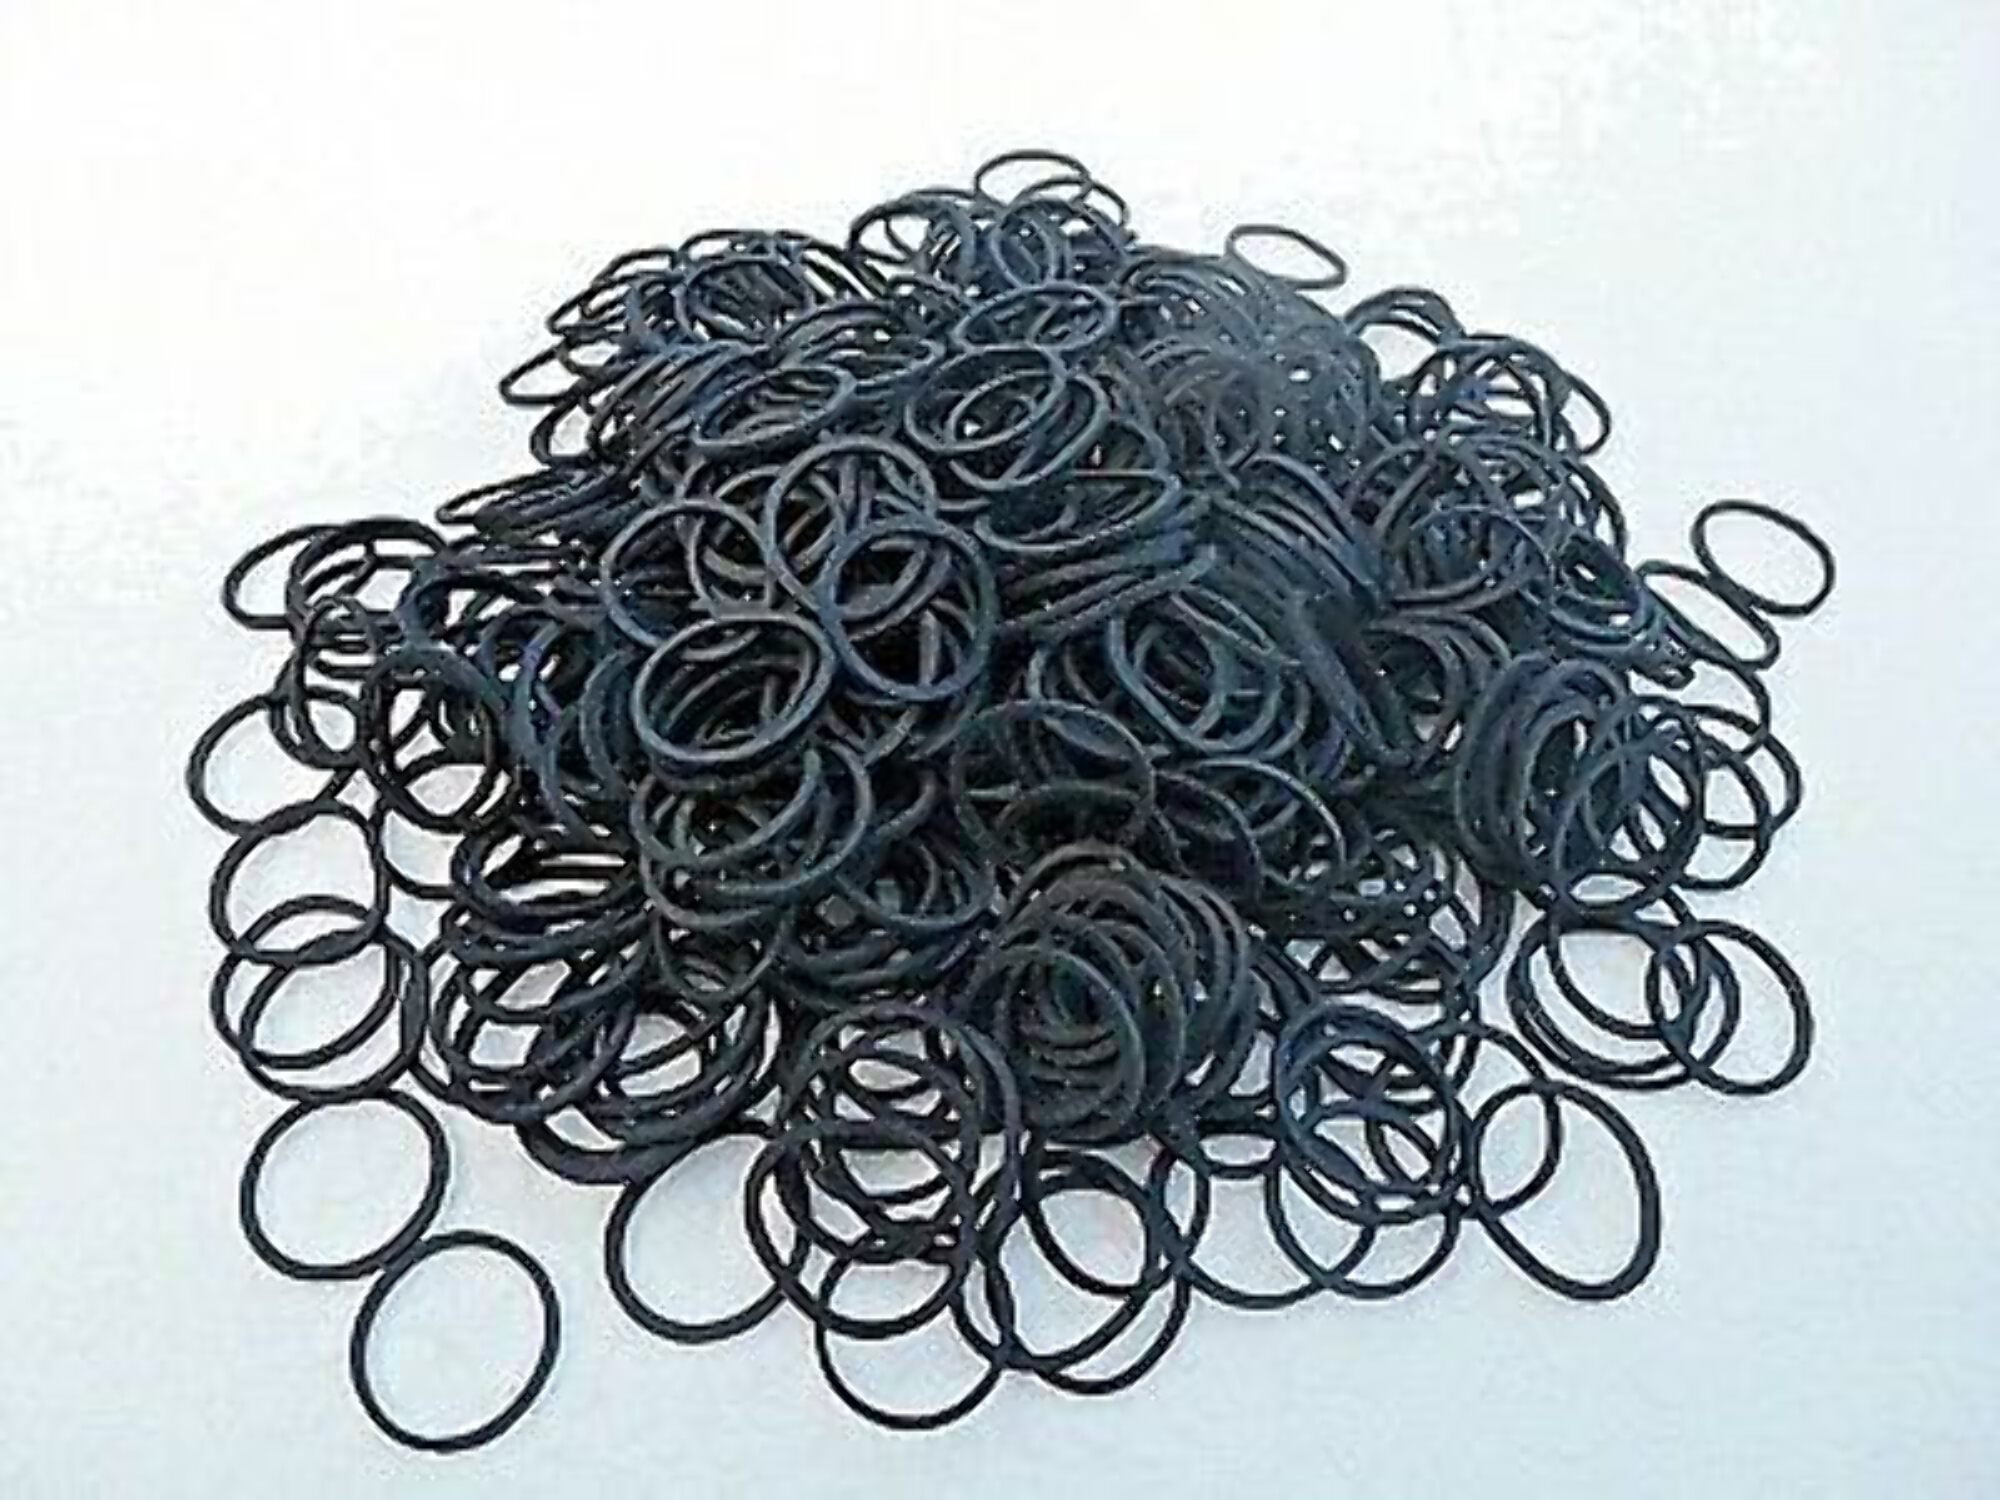 RUBBER BANDS 275-pcs BLACK/BROWN/AST/WHITE/RED- Magic Collection - GOOD  QUALITY